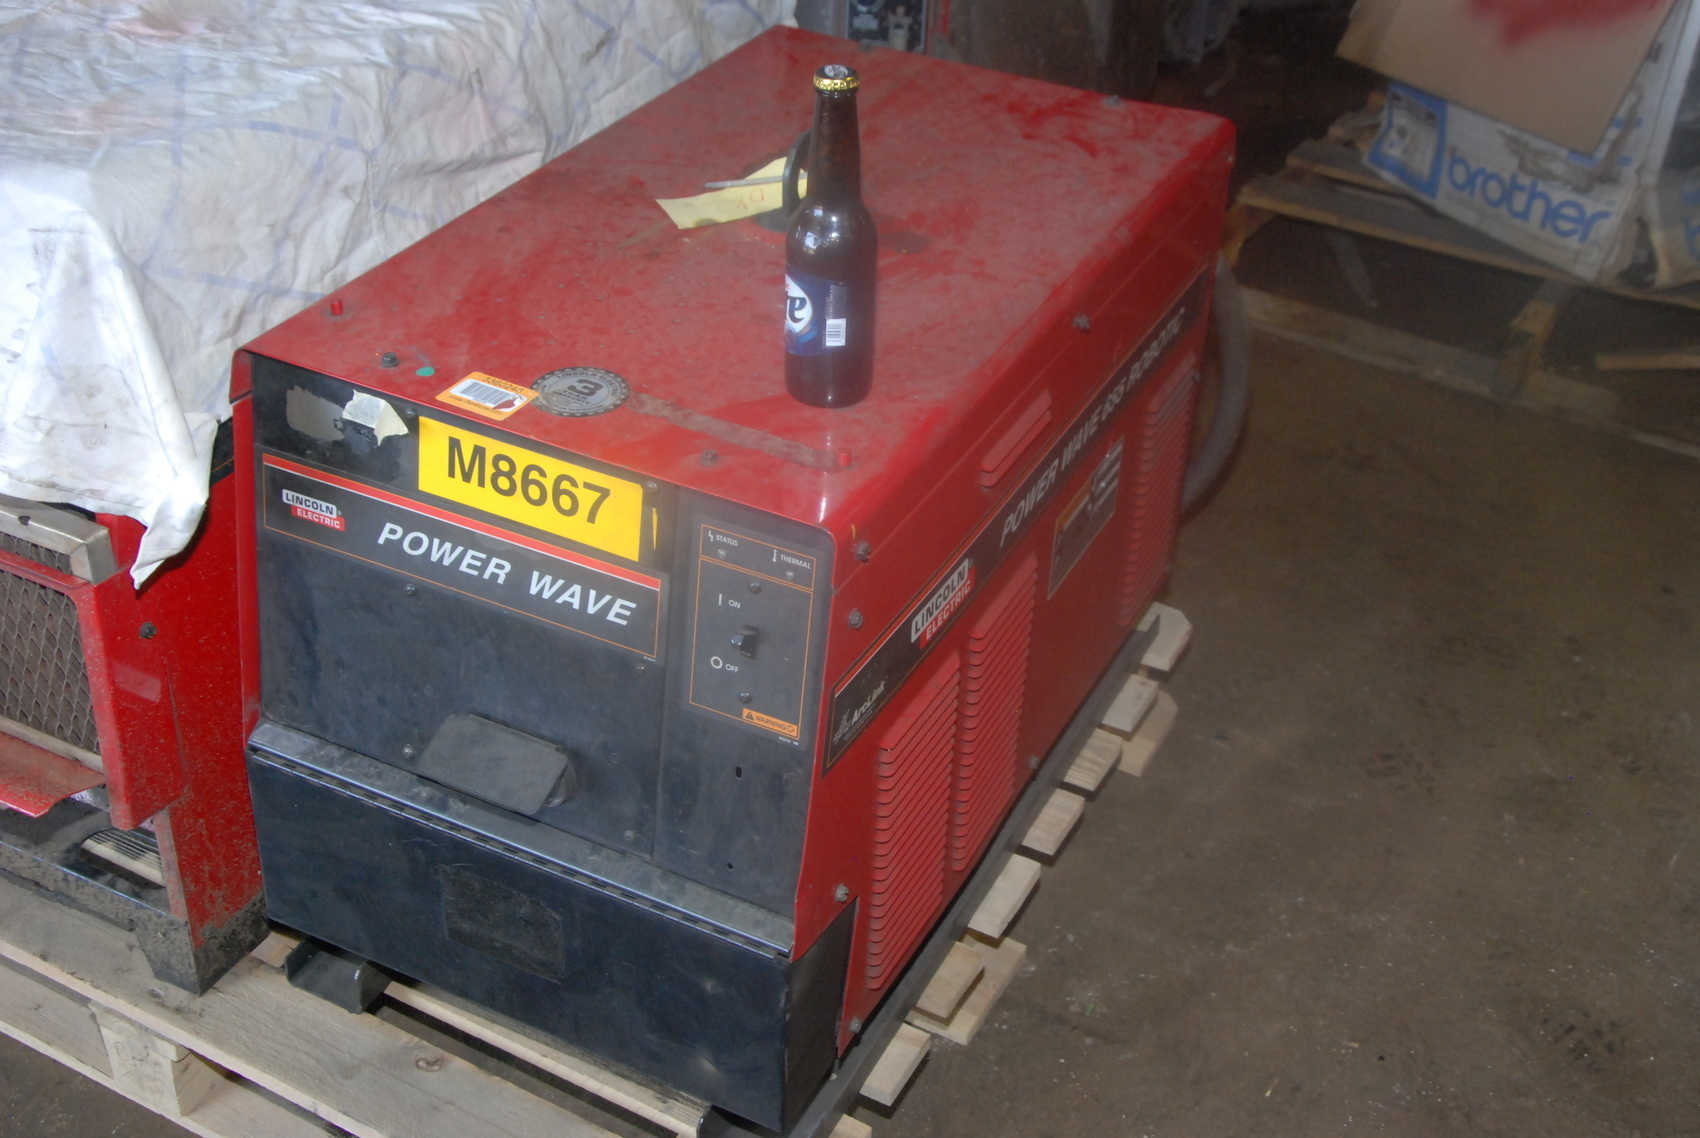 Lincoln electric Power Wave 655 welder